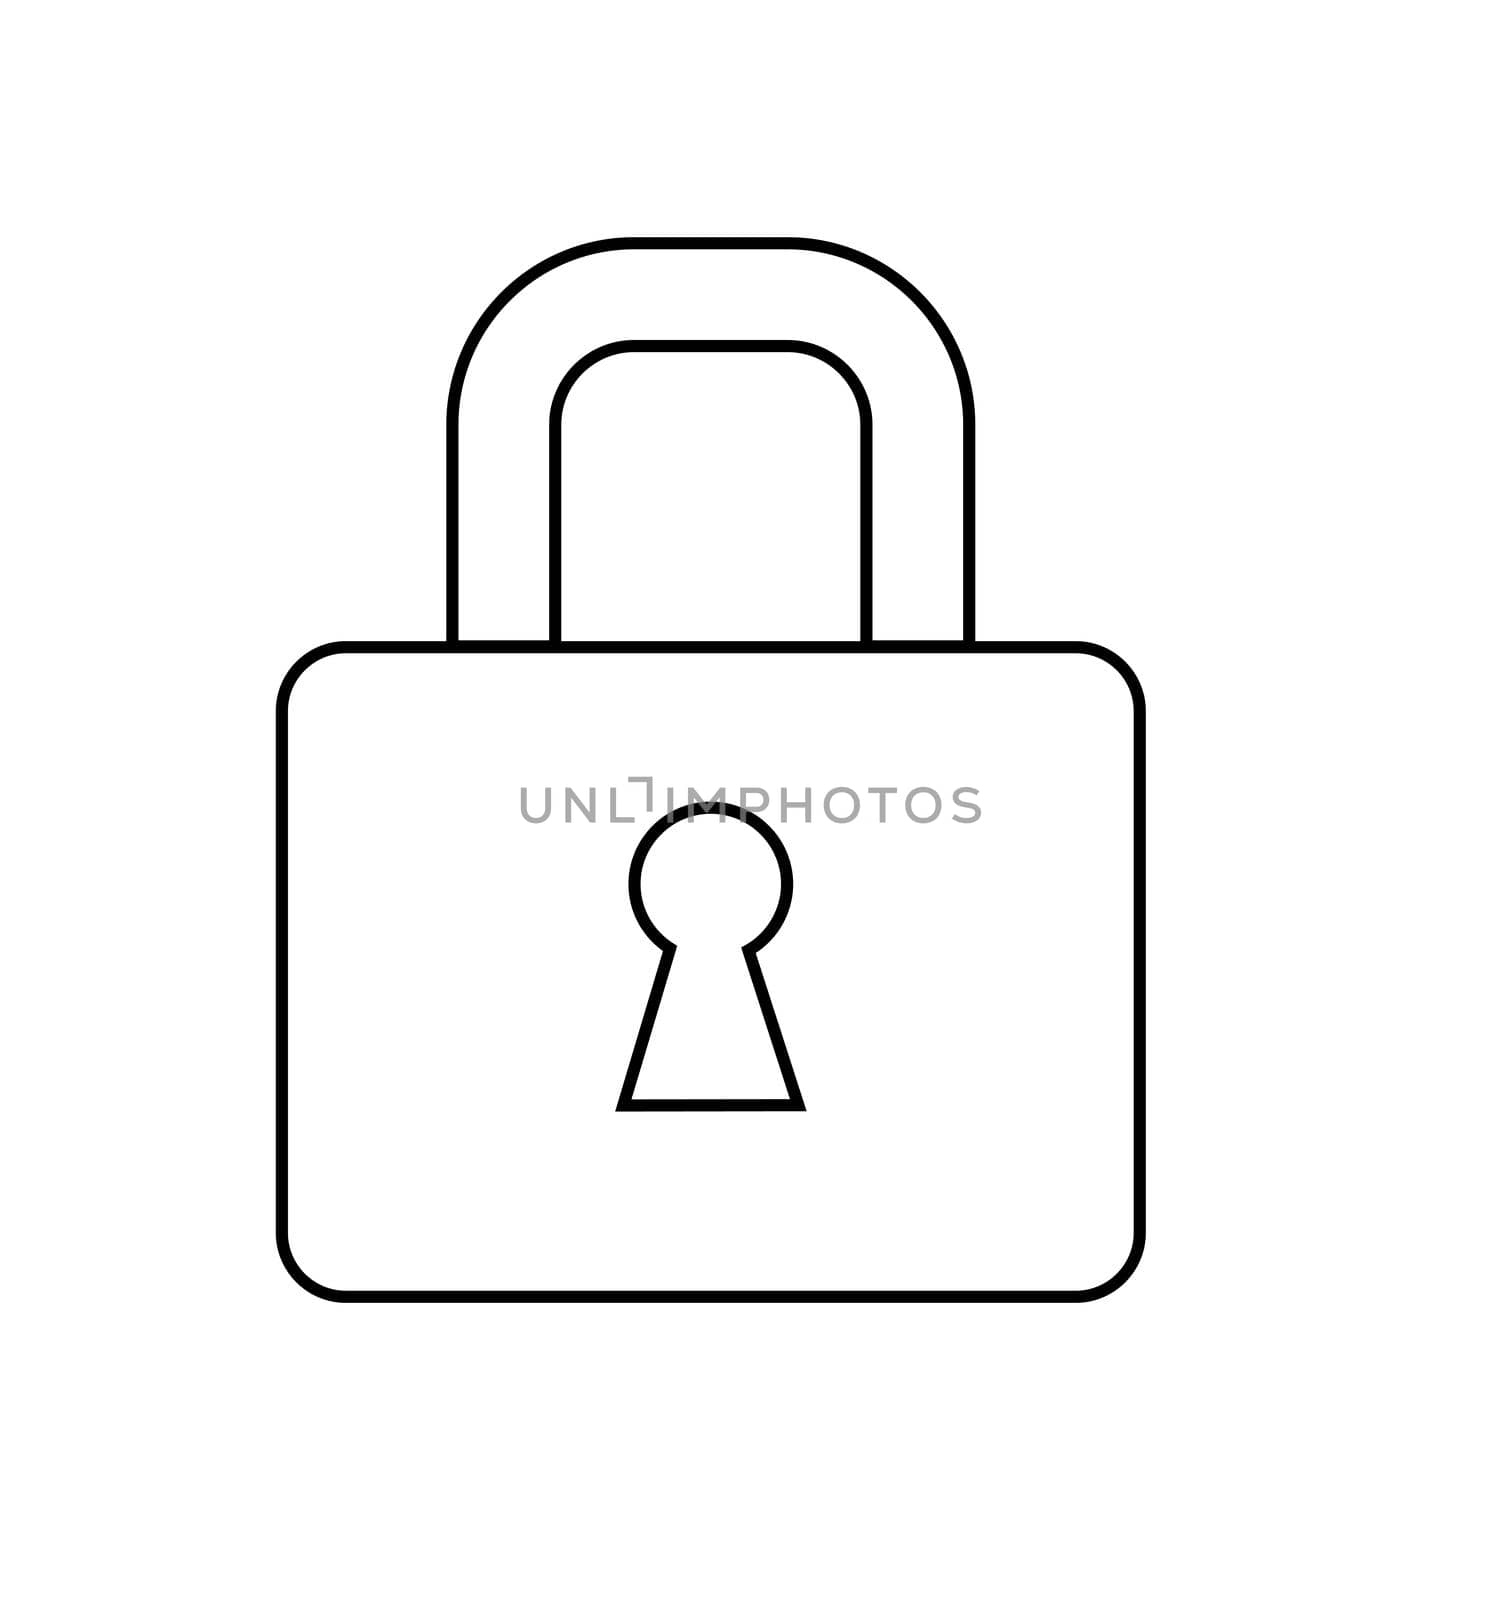 Lock icon protection line symbol flat style isolated by Esfir98